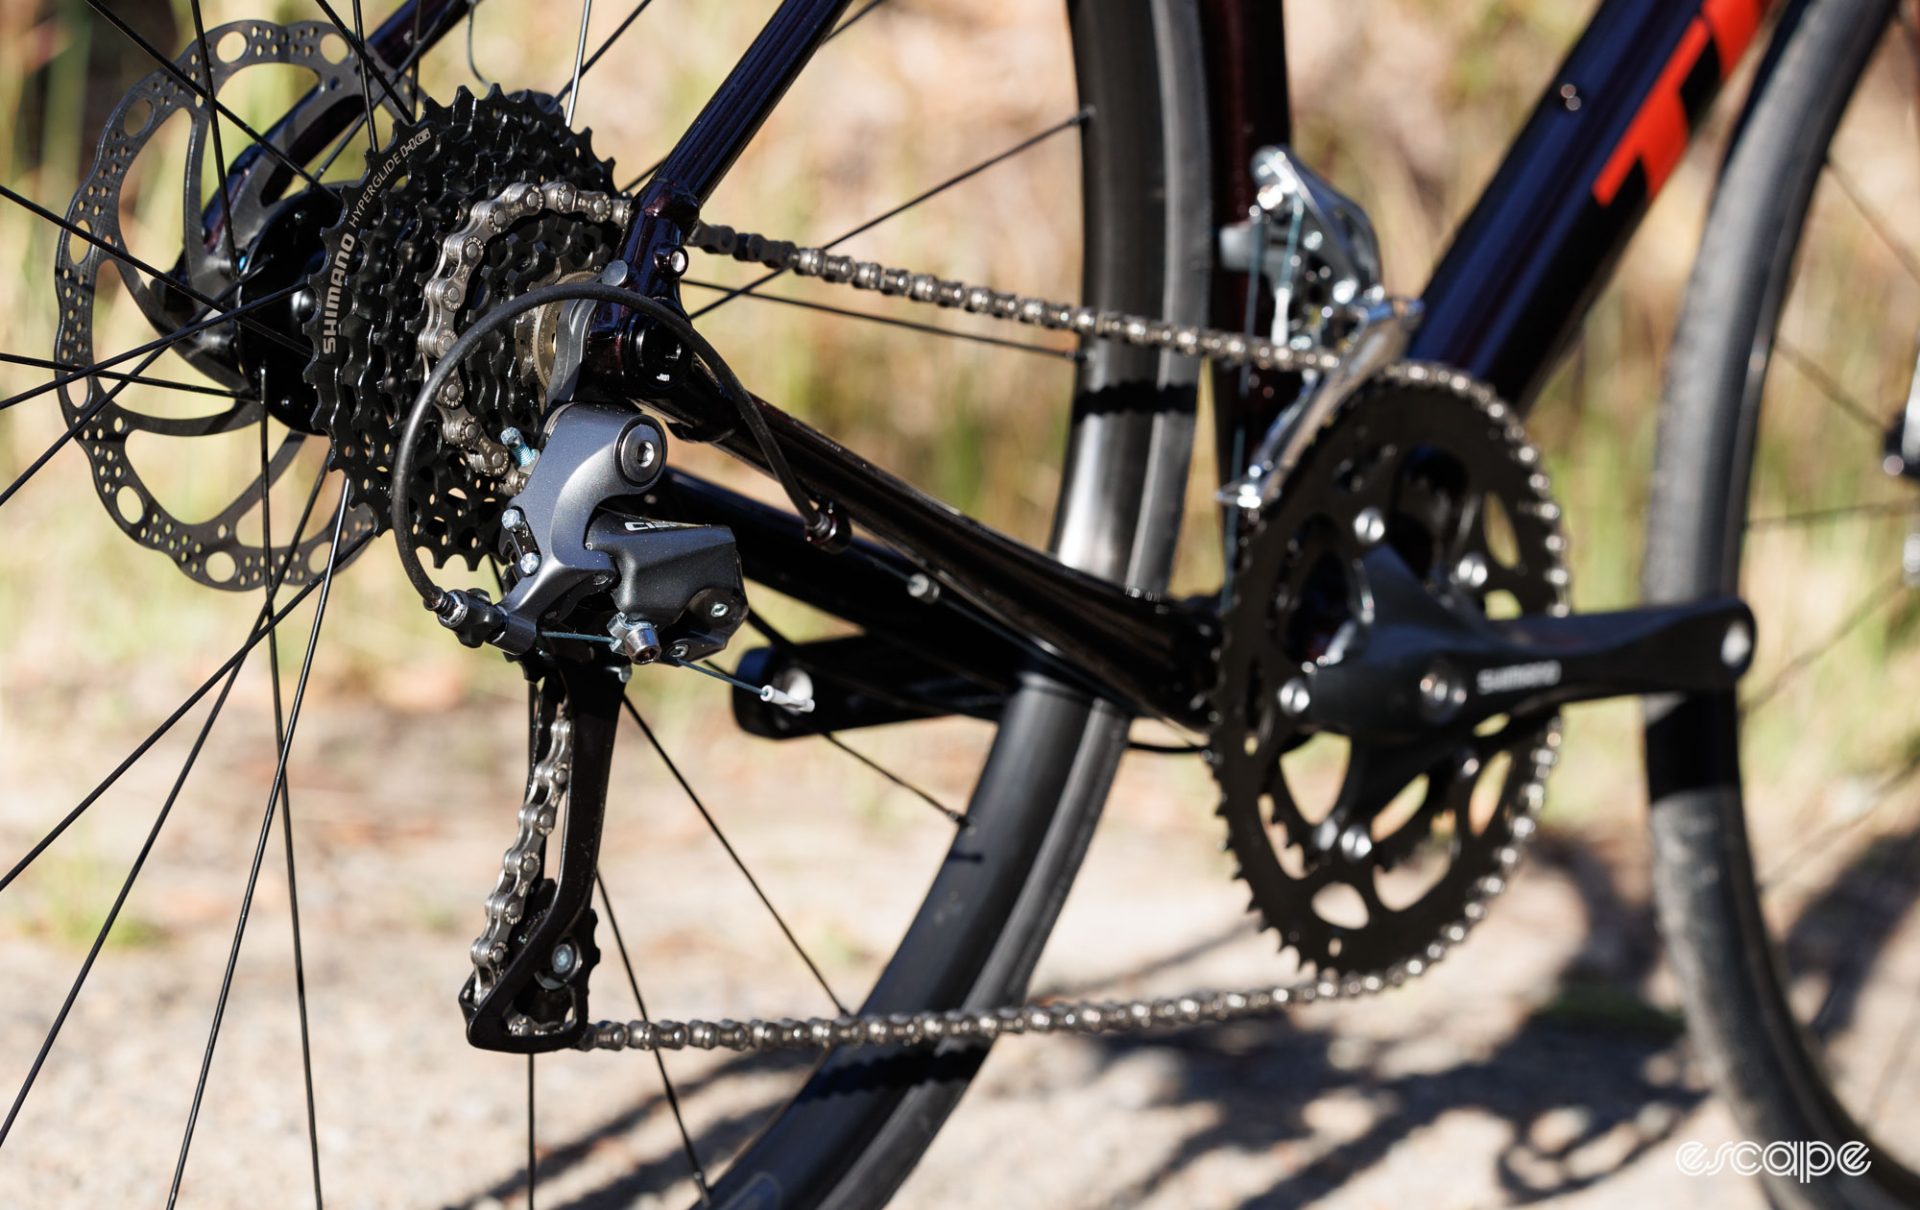 The Shimano Claris drivetrain in view, with a focus on the rear derailleur. 